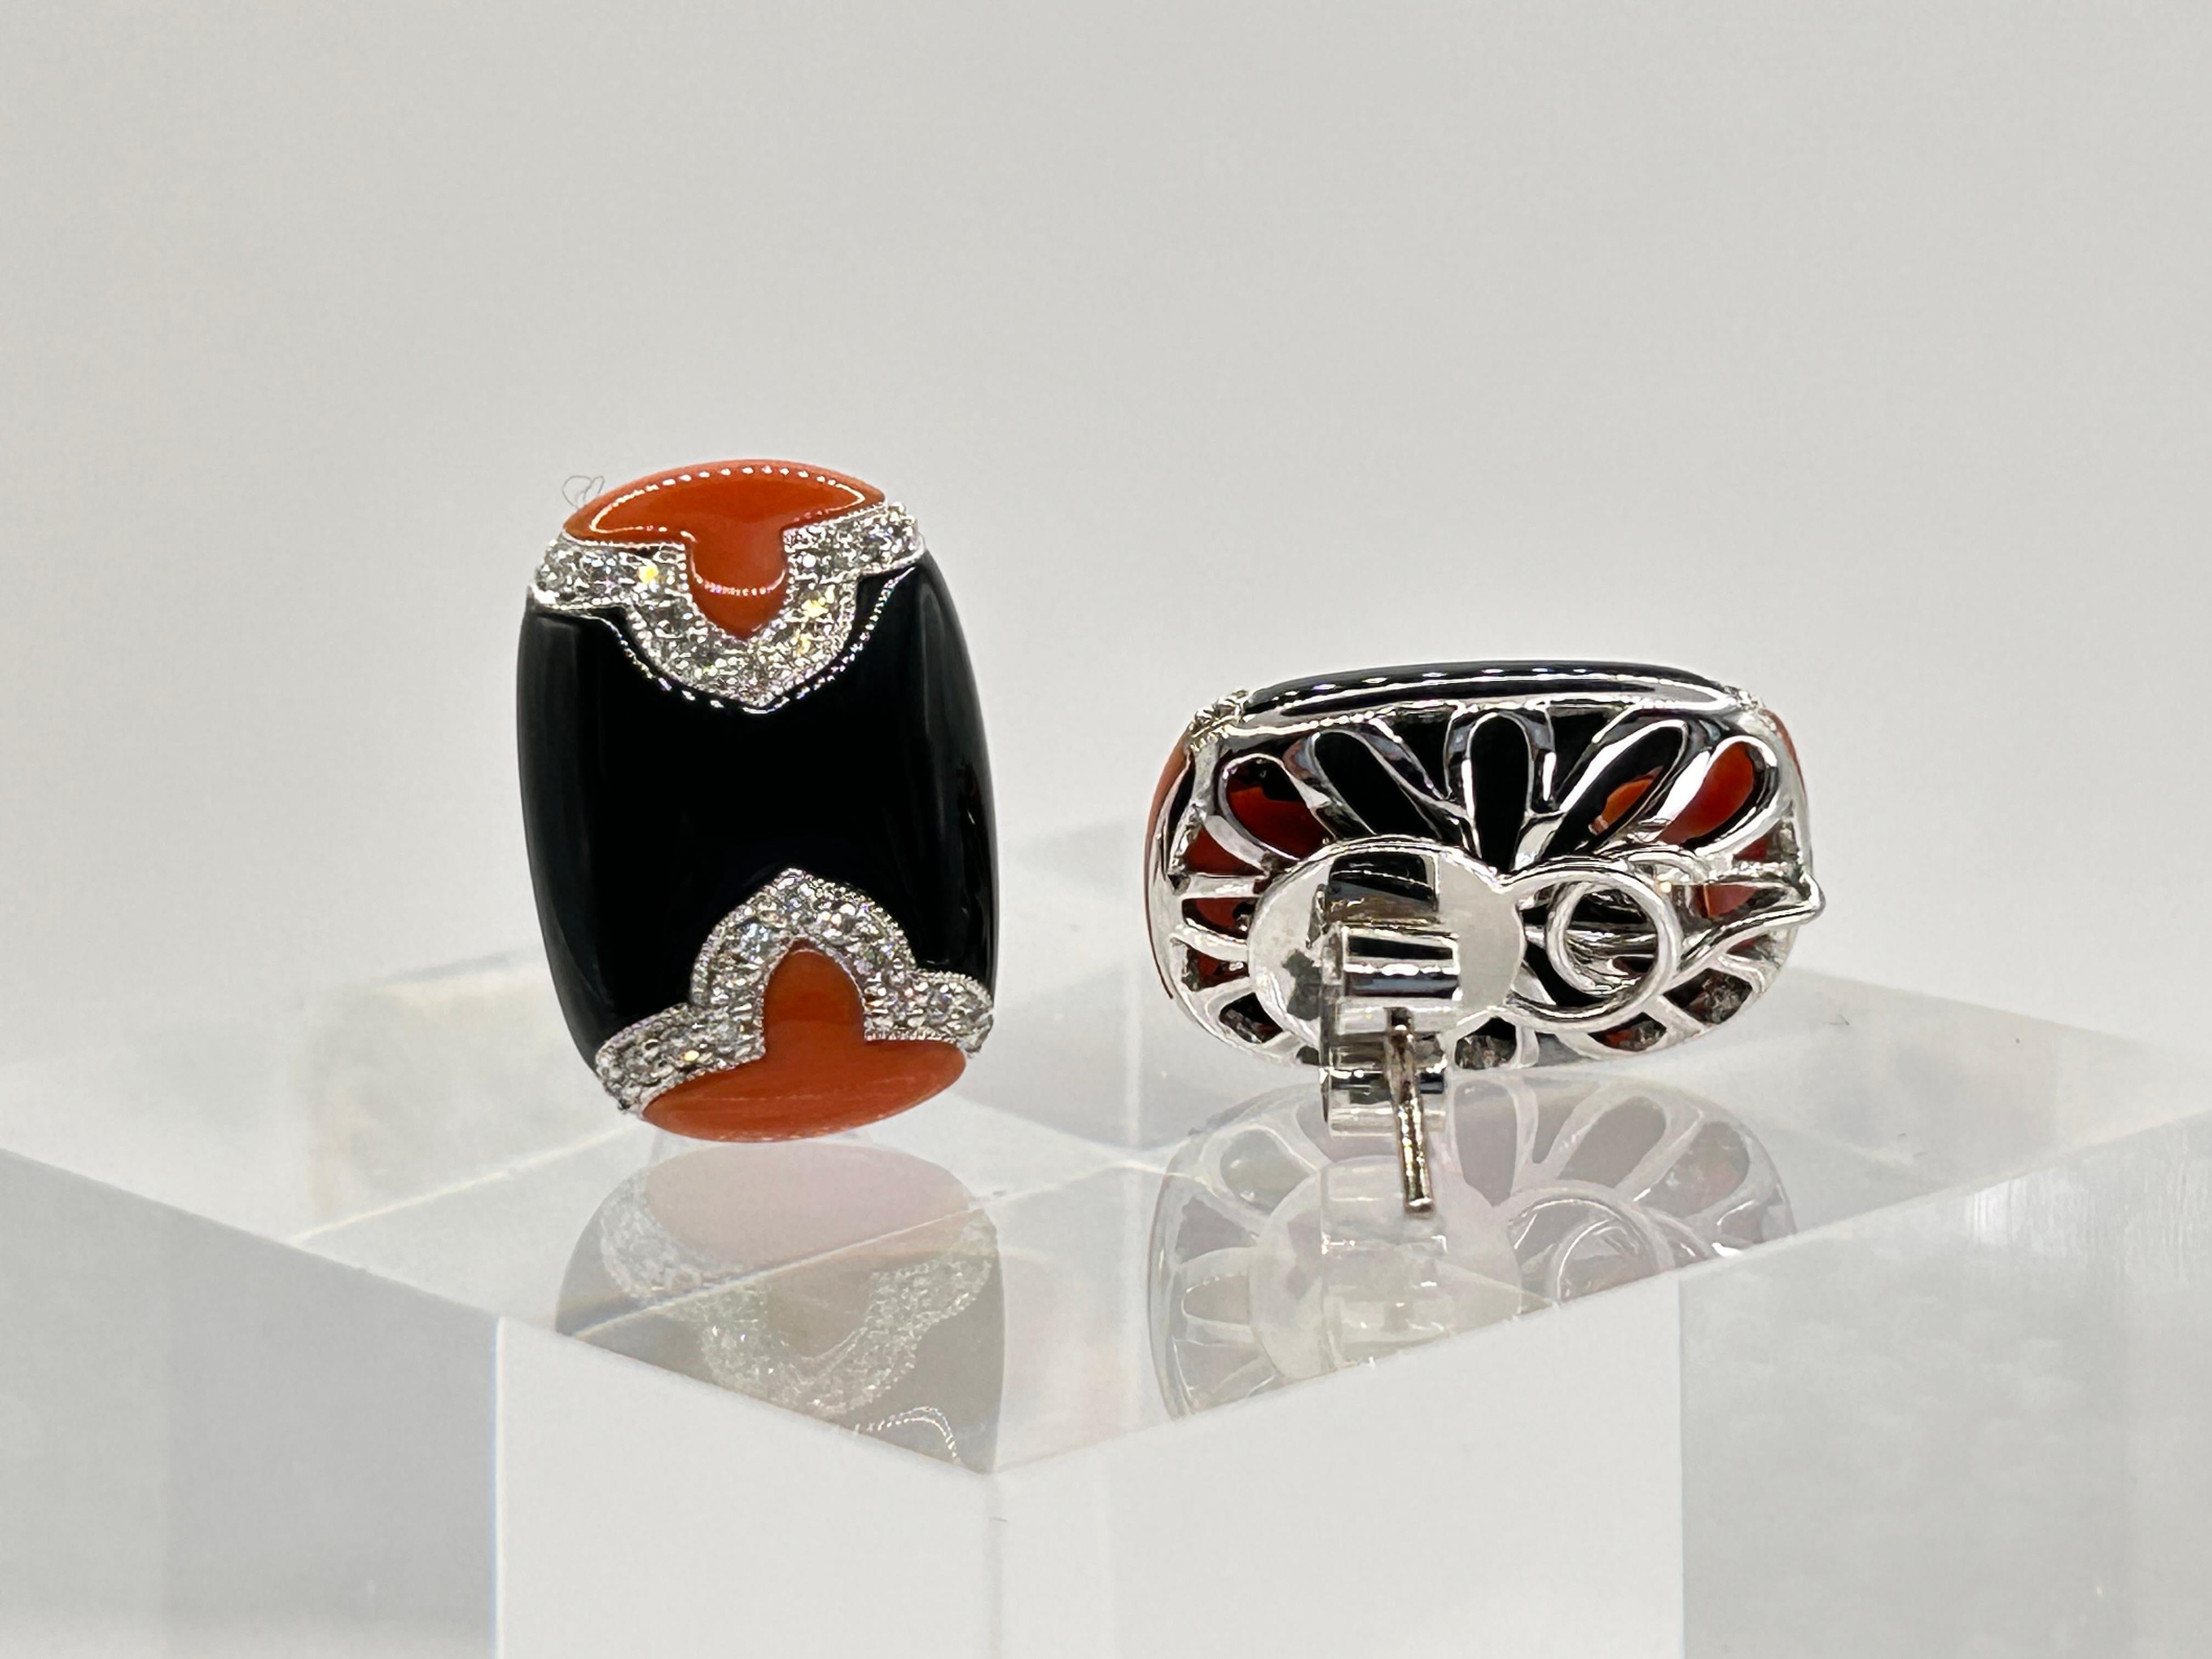 Striking Combination of Colors!

18 Karat White Gold Earrrings, set with reddish pink Coral, Onyx and Full Cut Diamonds weighing 0.32 Carat.  